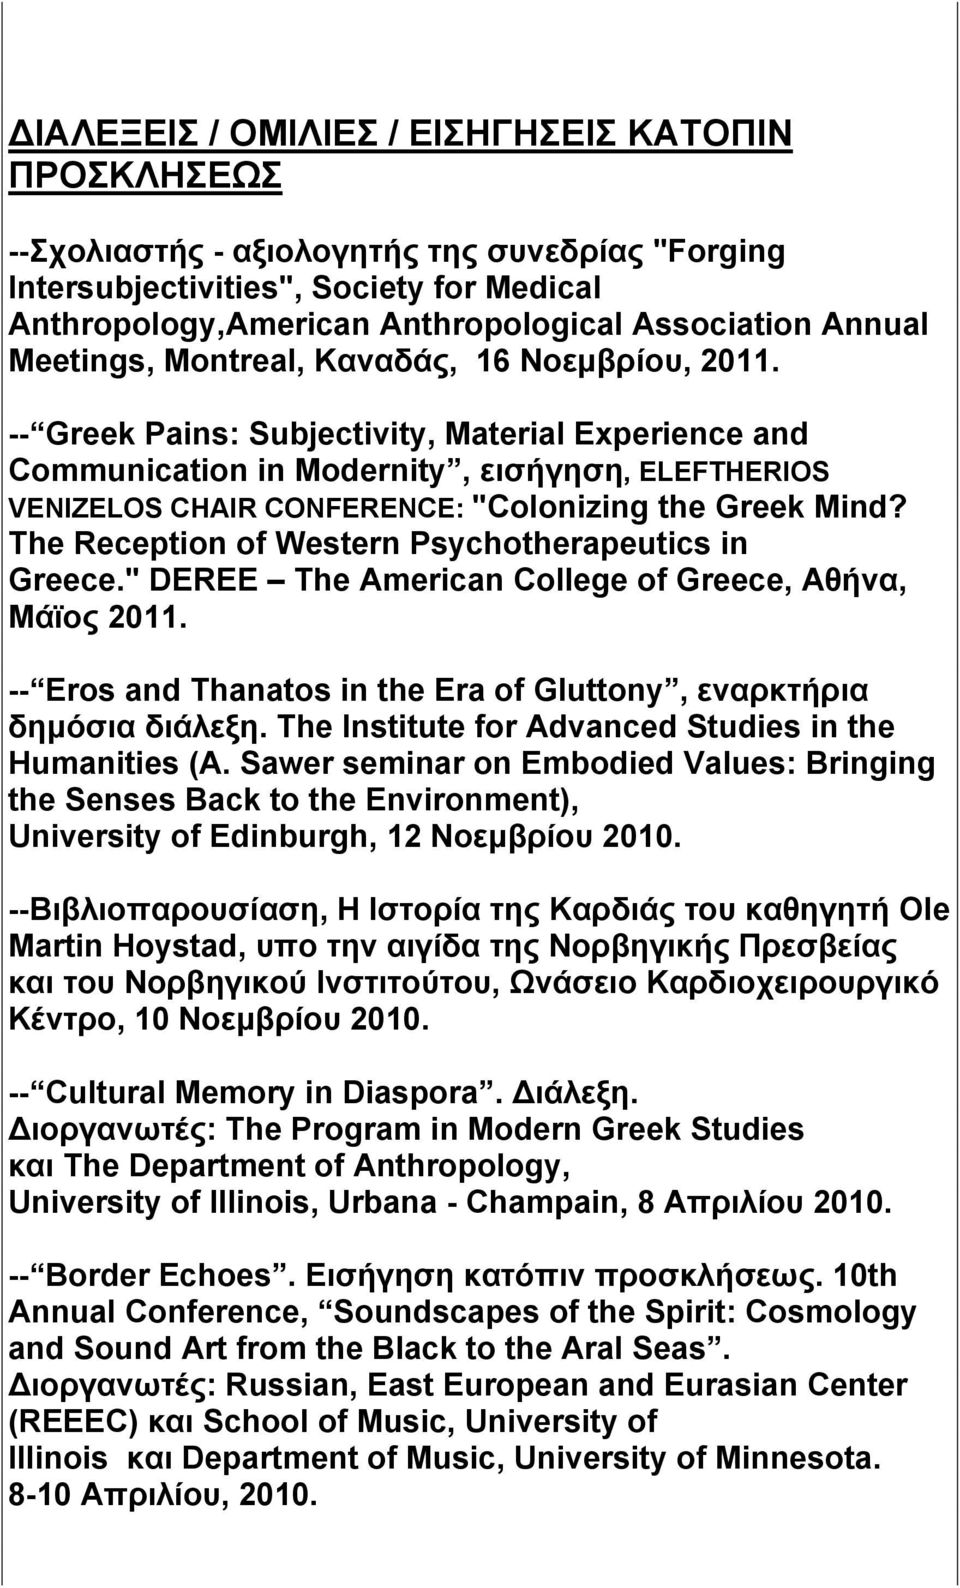 -- Greek Pains: Subjectivity, Material Experience and Communication in Modernity, εισήγηση, ELEFTHERIOS VENIZELOS CHAIR CONFERENCE: "Colonizing the Greek Mind?